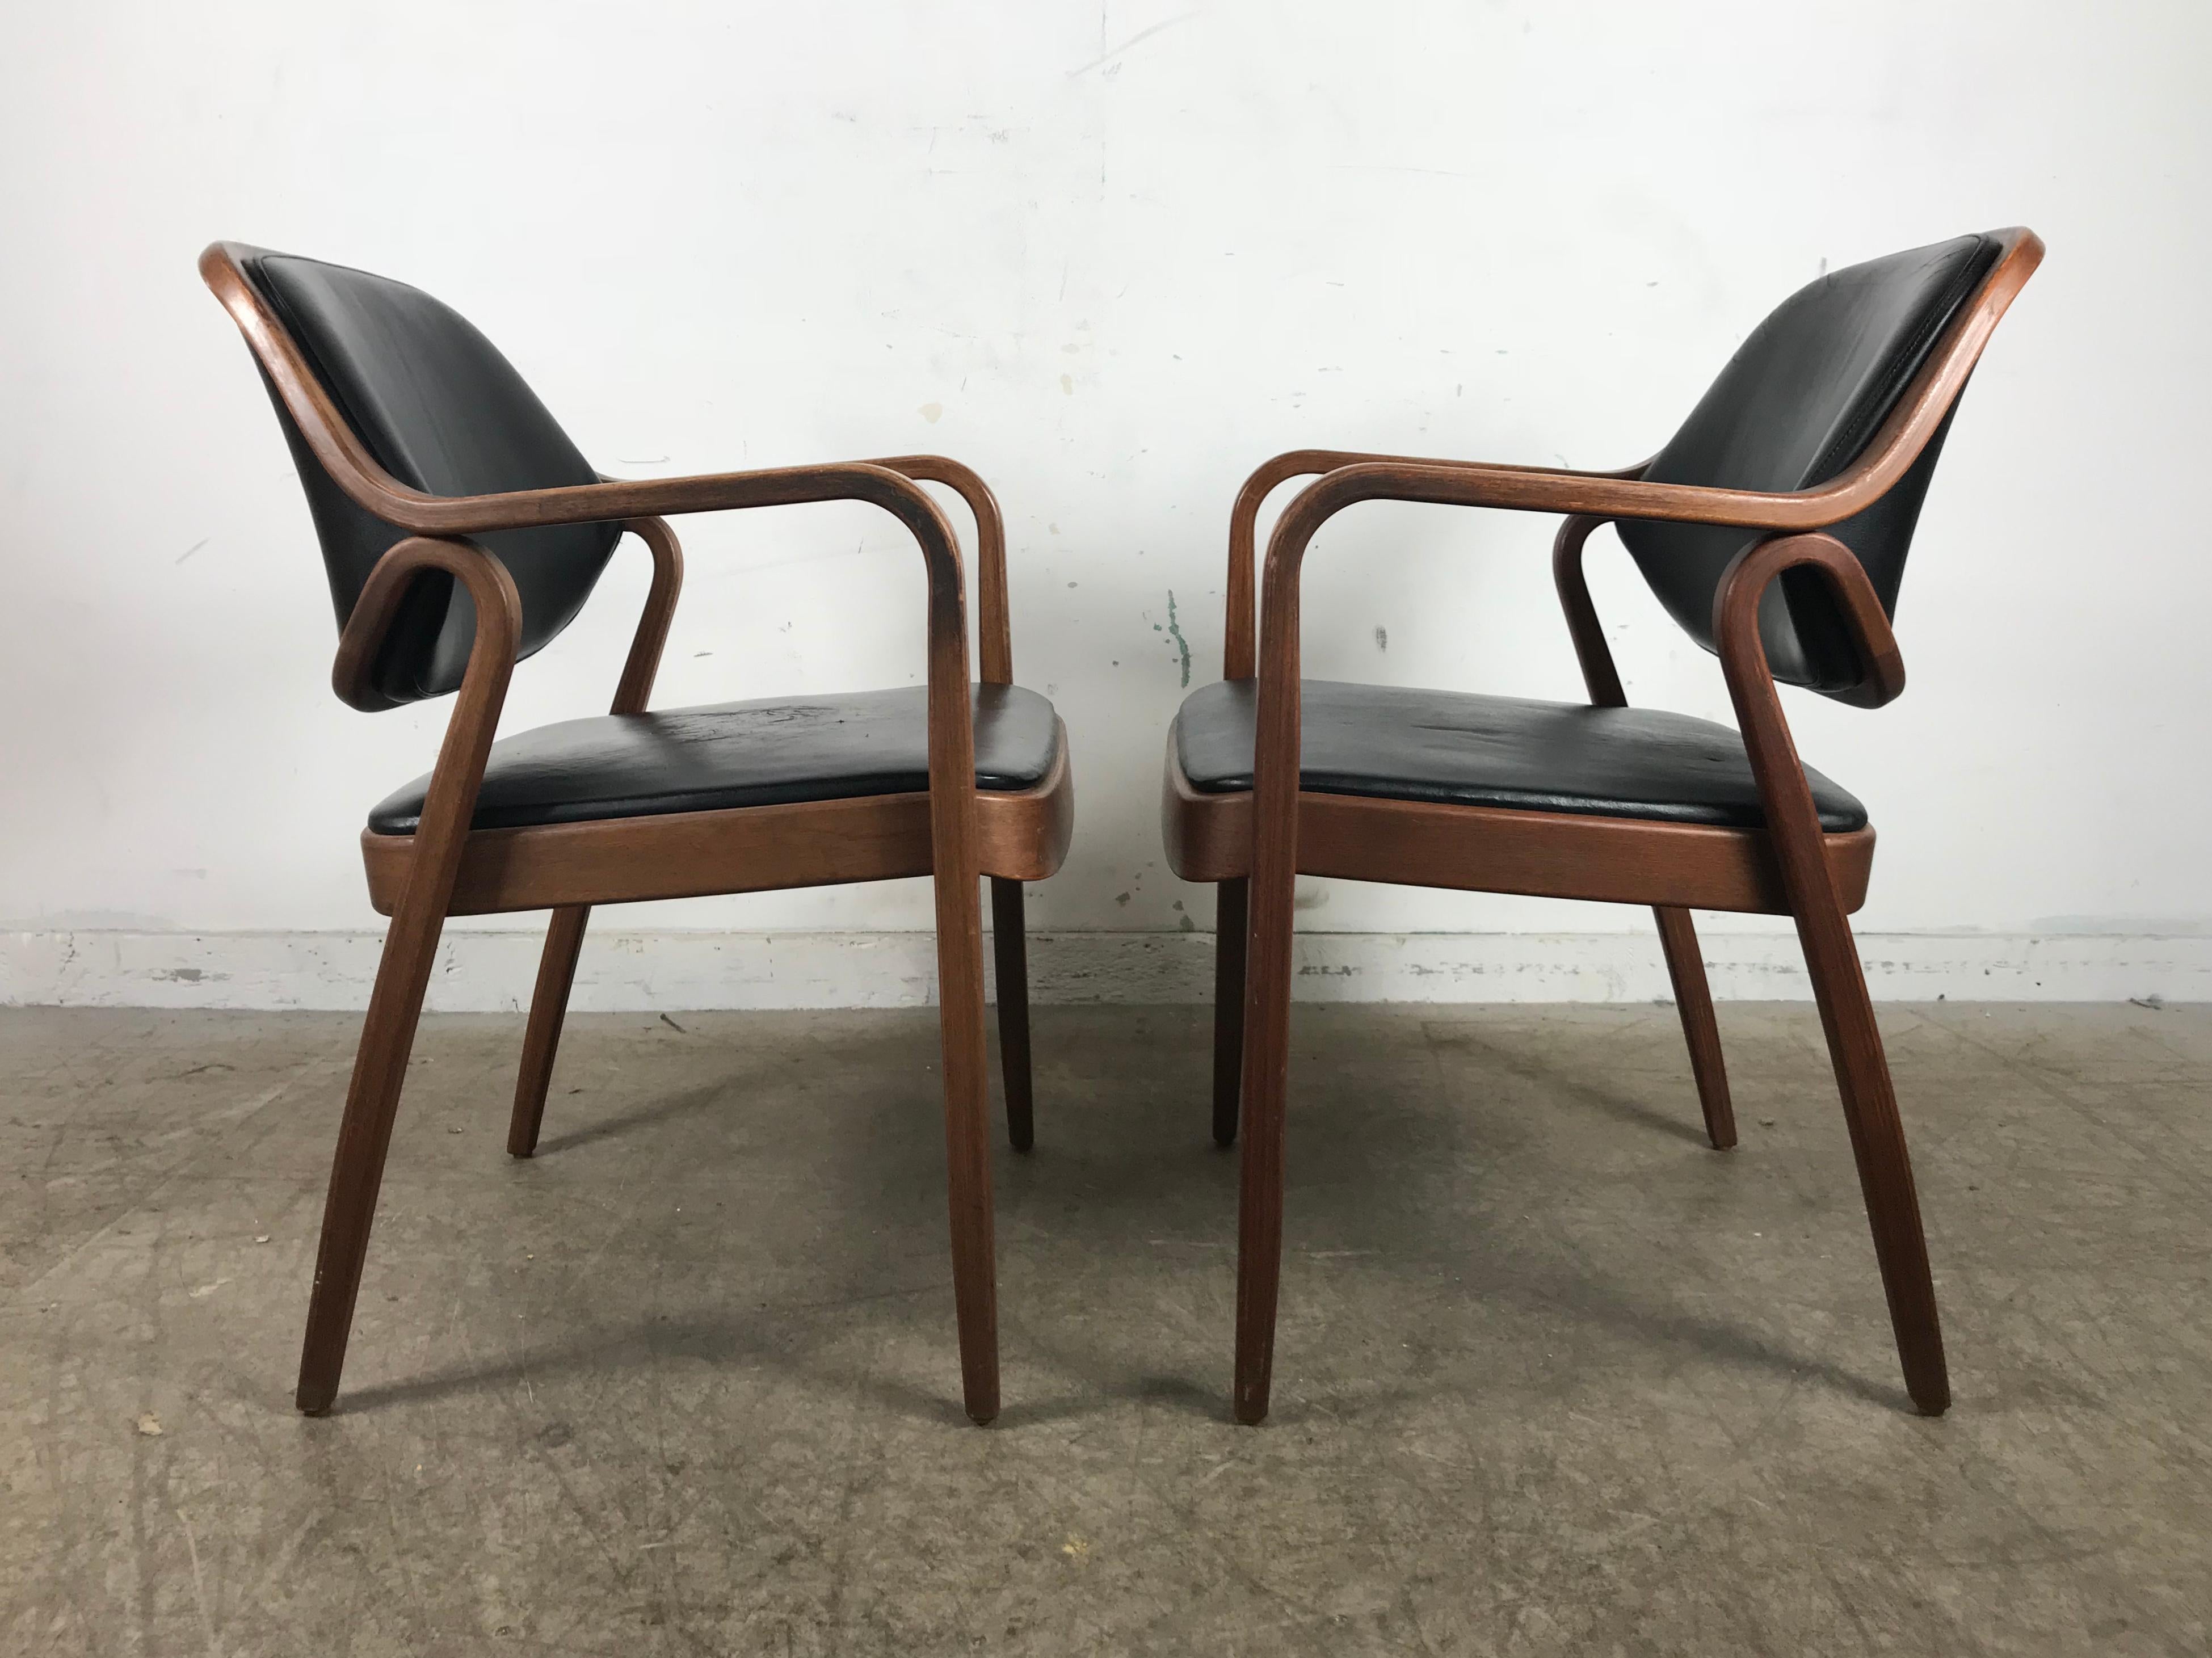 Mid-Century Modern Pair of Modernist Bentwood Mahogany and Leather Chairs by Don Pettit for Knoll